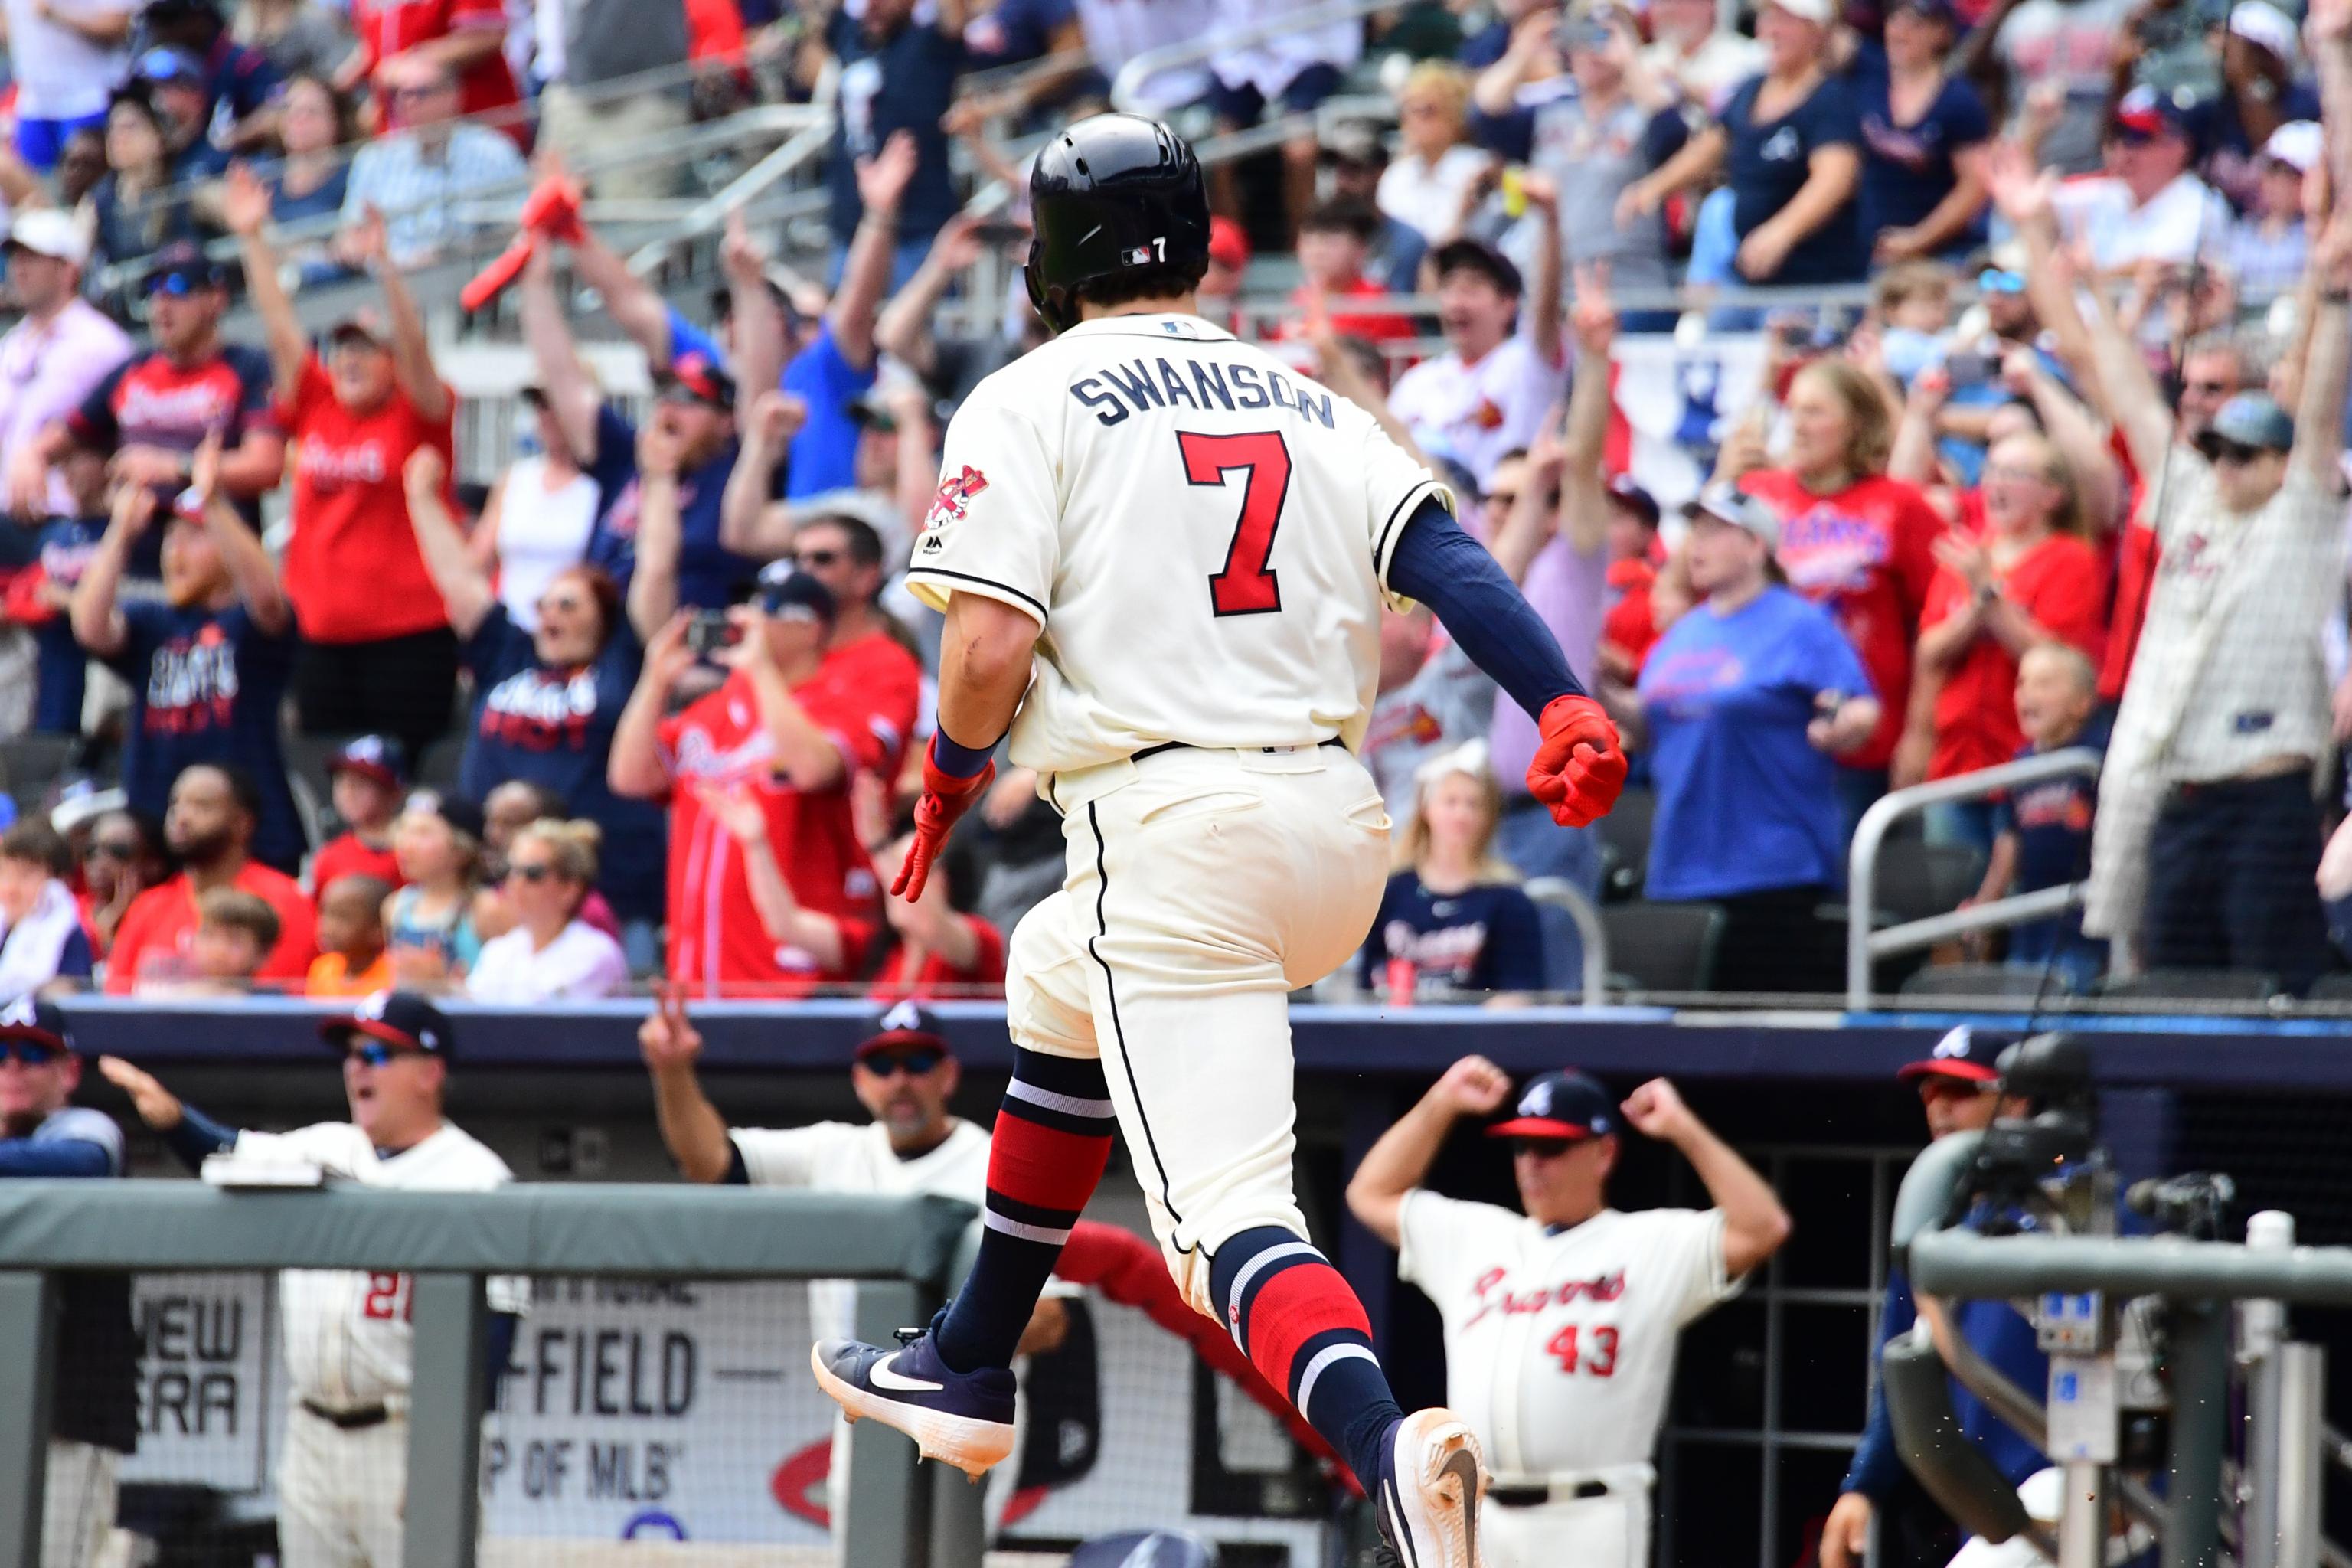 Dansby Swanson returns in Minor League game